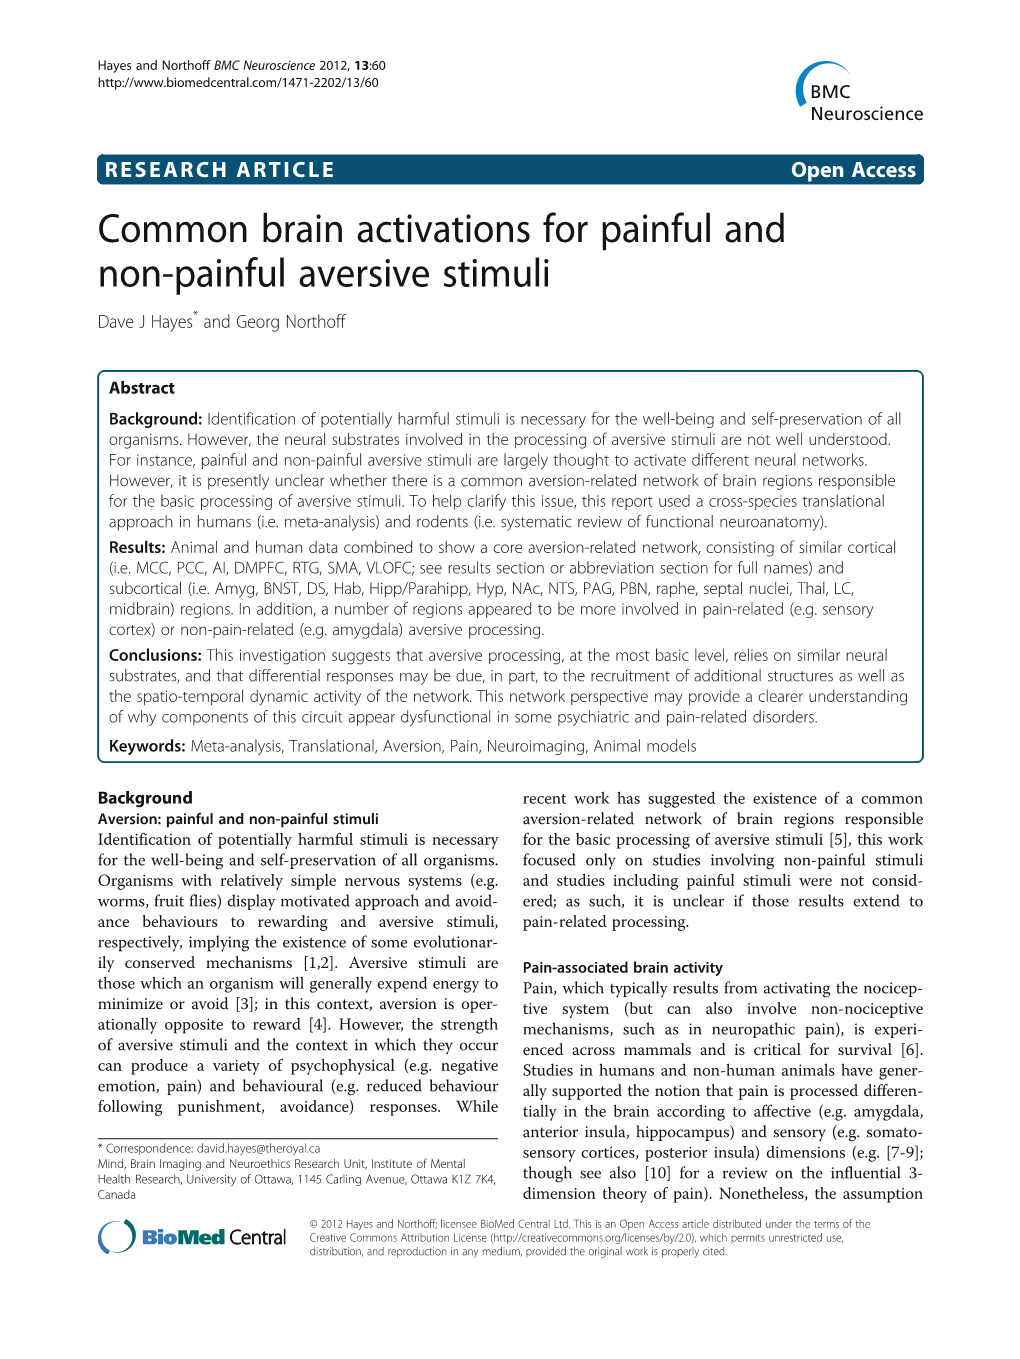 Common Brain Activations for Painful and Non-Painful Aversive Stimuli Dave J Hayes* and Georg Northoff